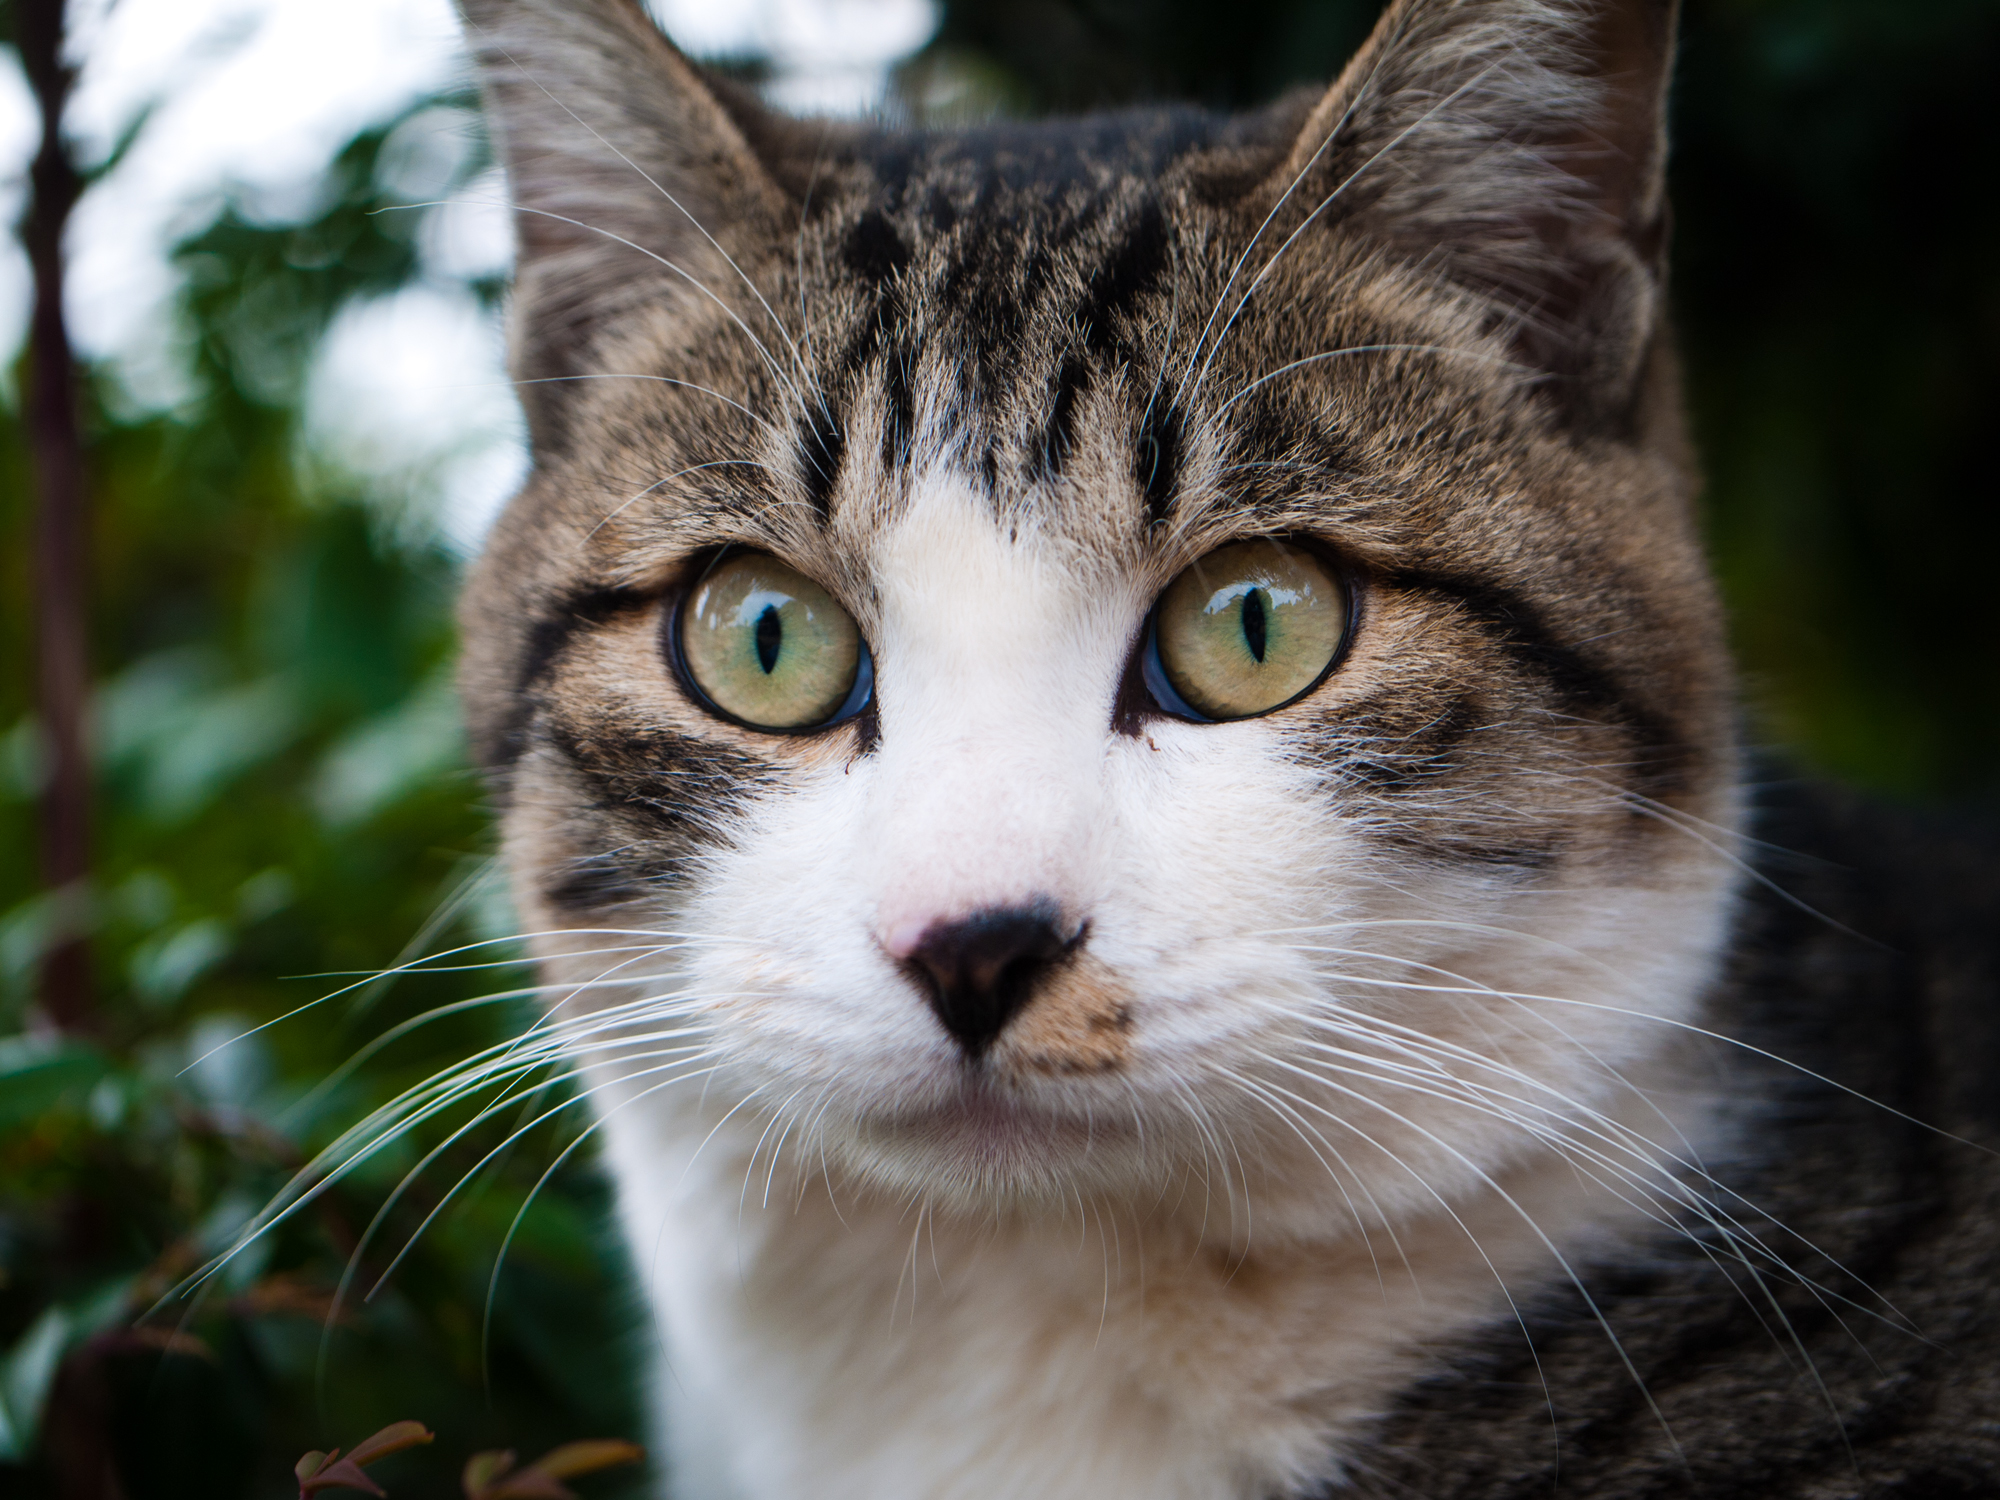 a close up image of a cat in the outdoors